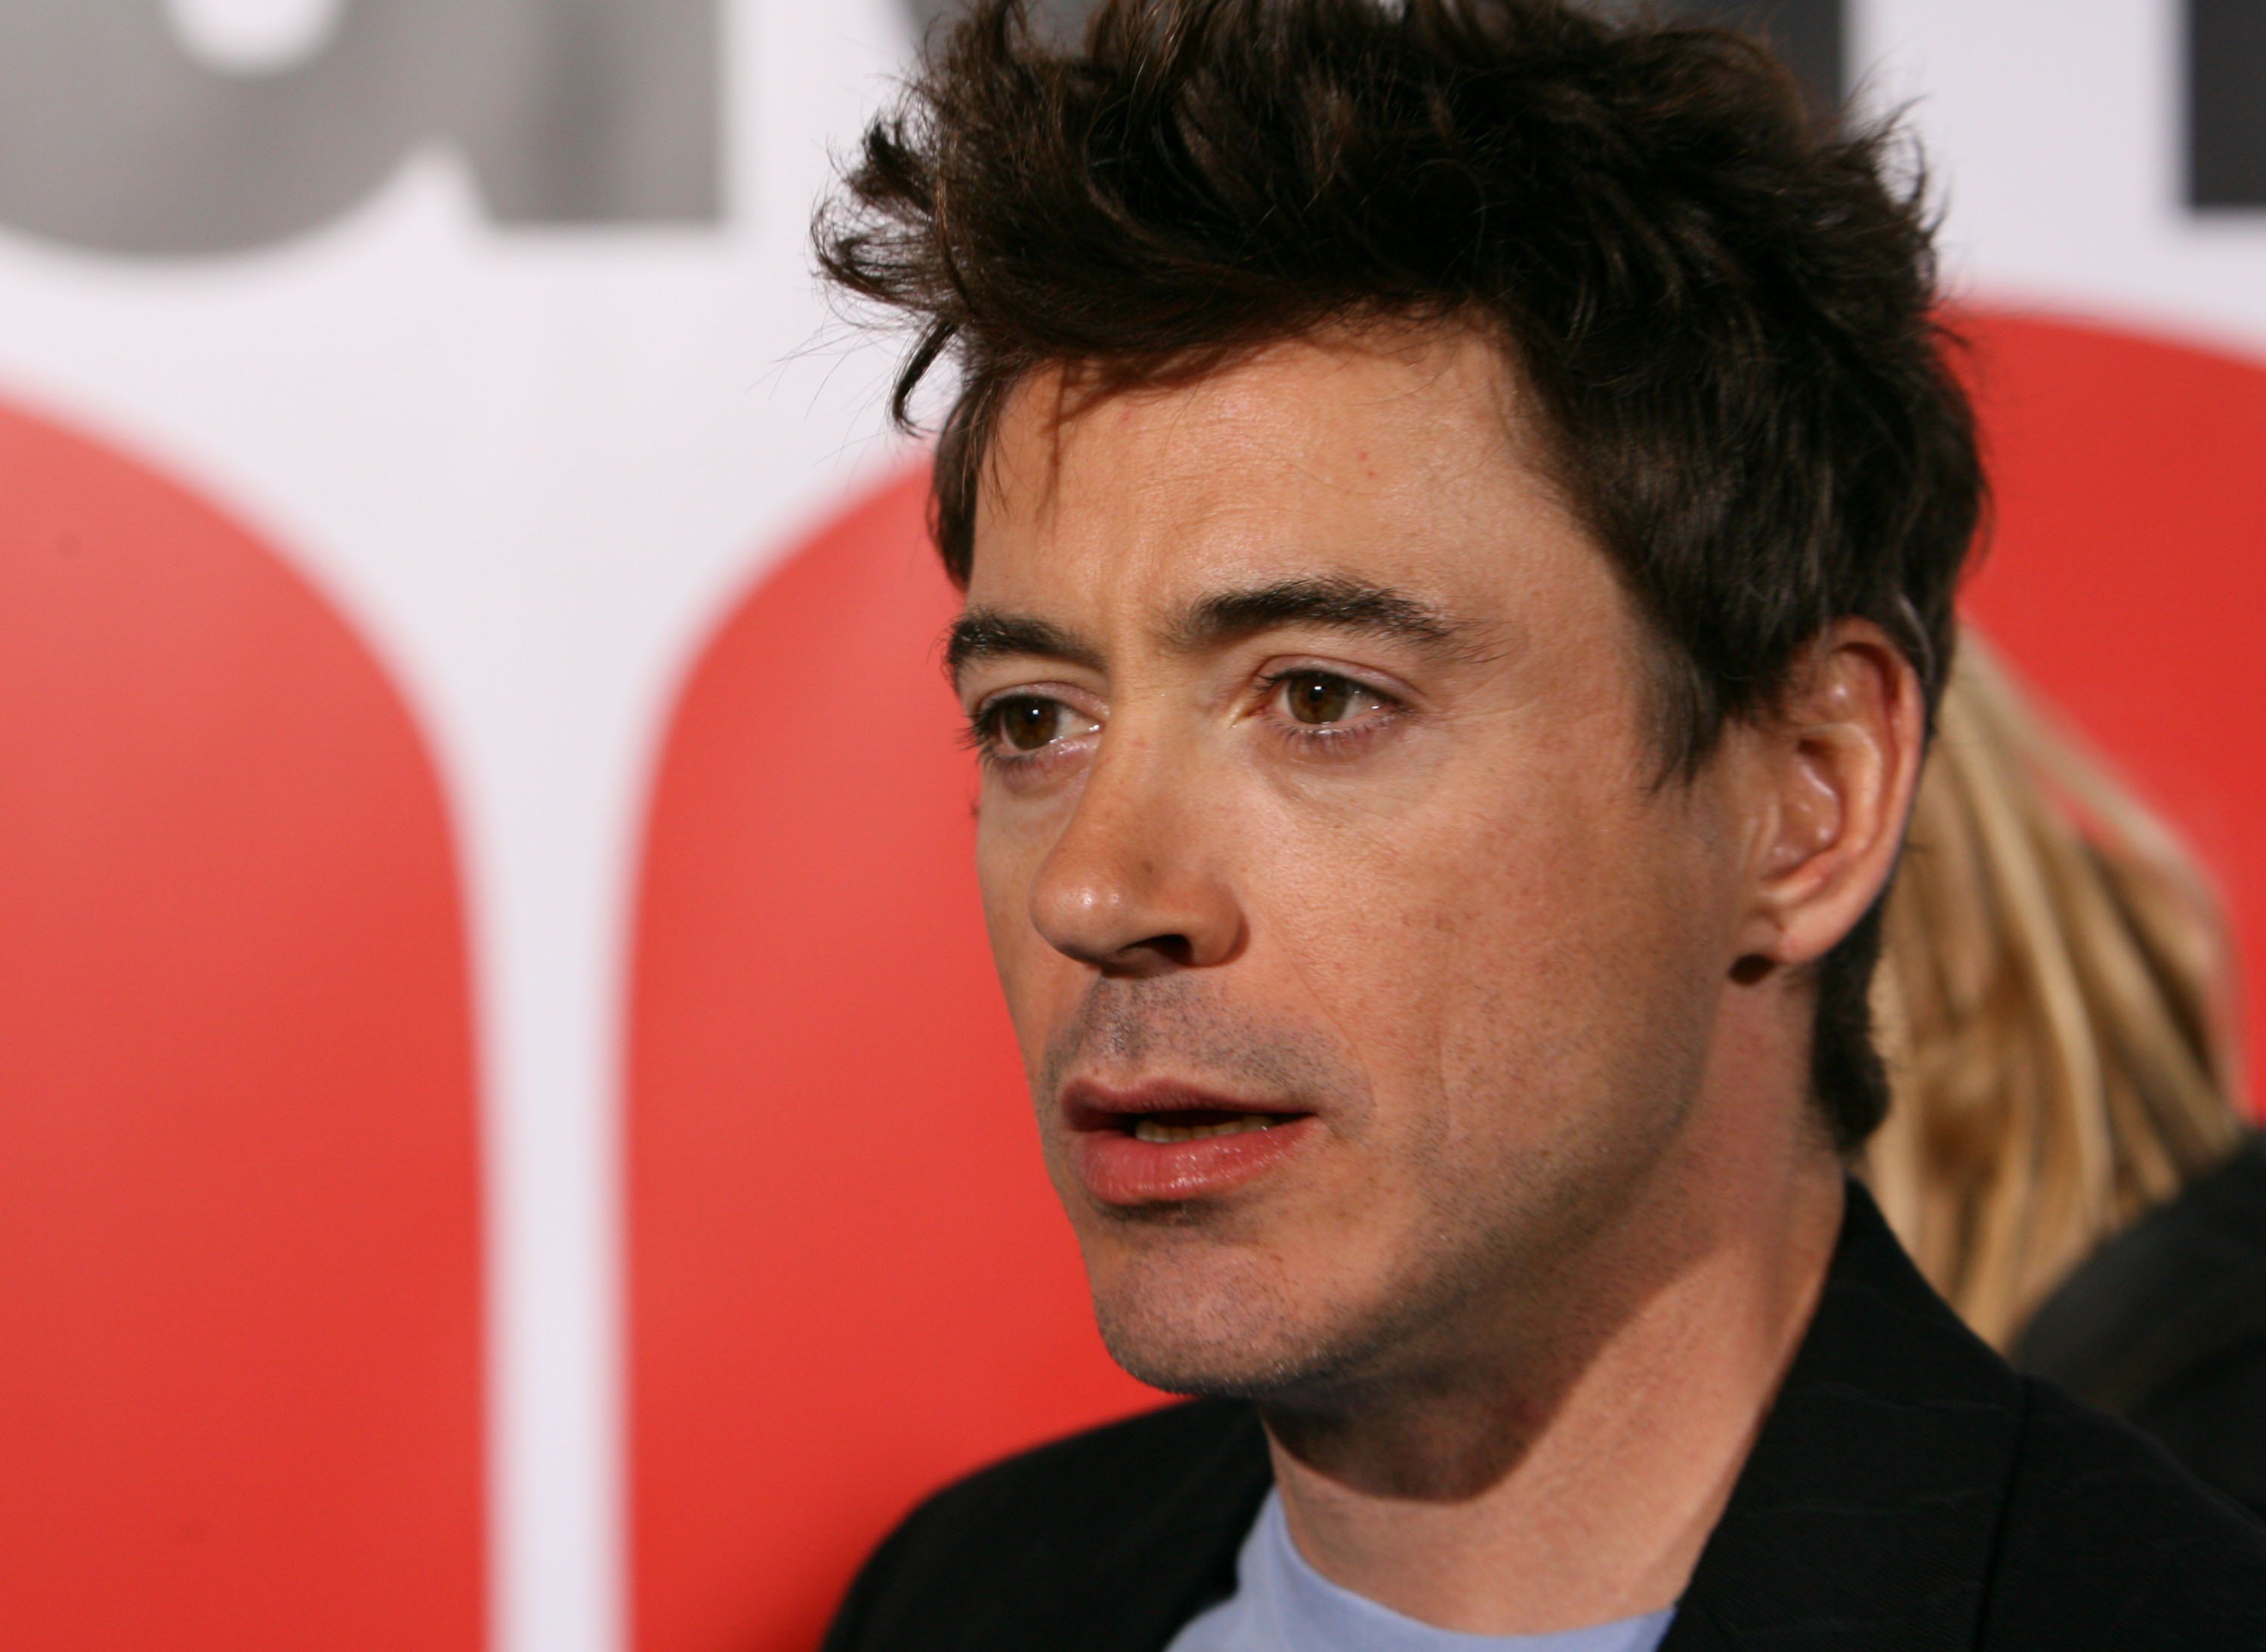 Robert Downey Jr. at the premiere of "The Shaggy Dog" in 2006 in Los Angeles, California | Source: Getty Images